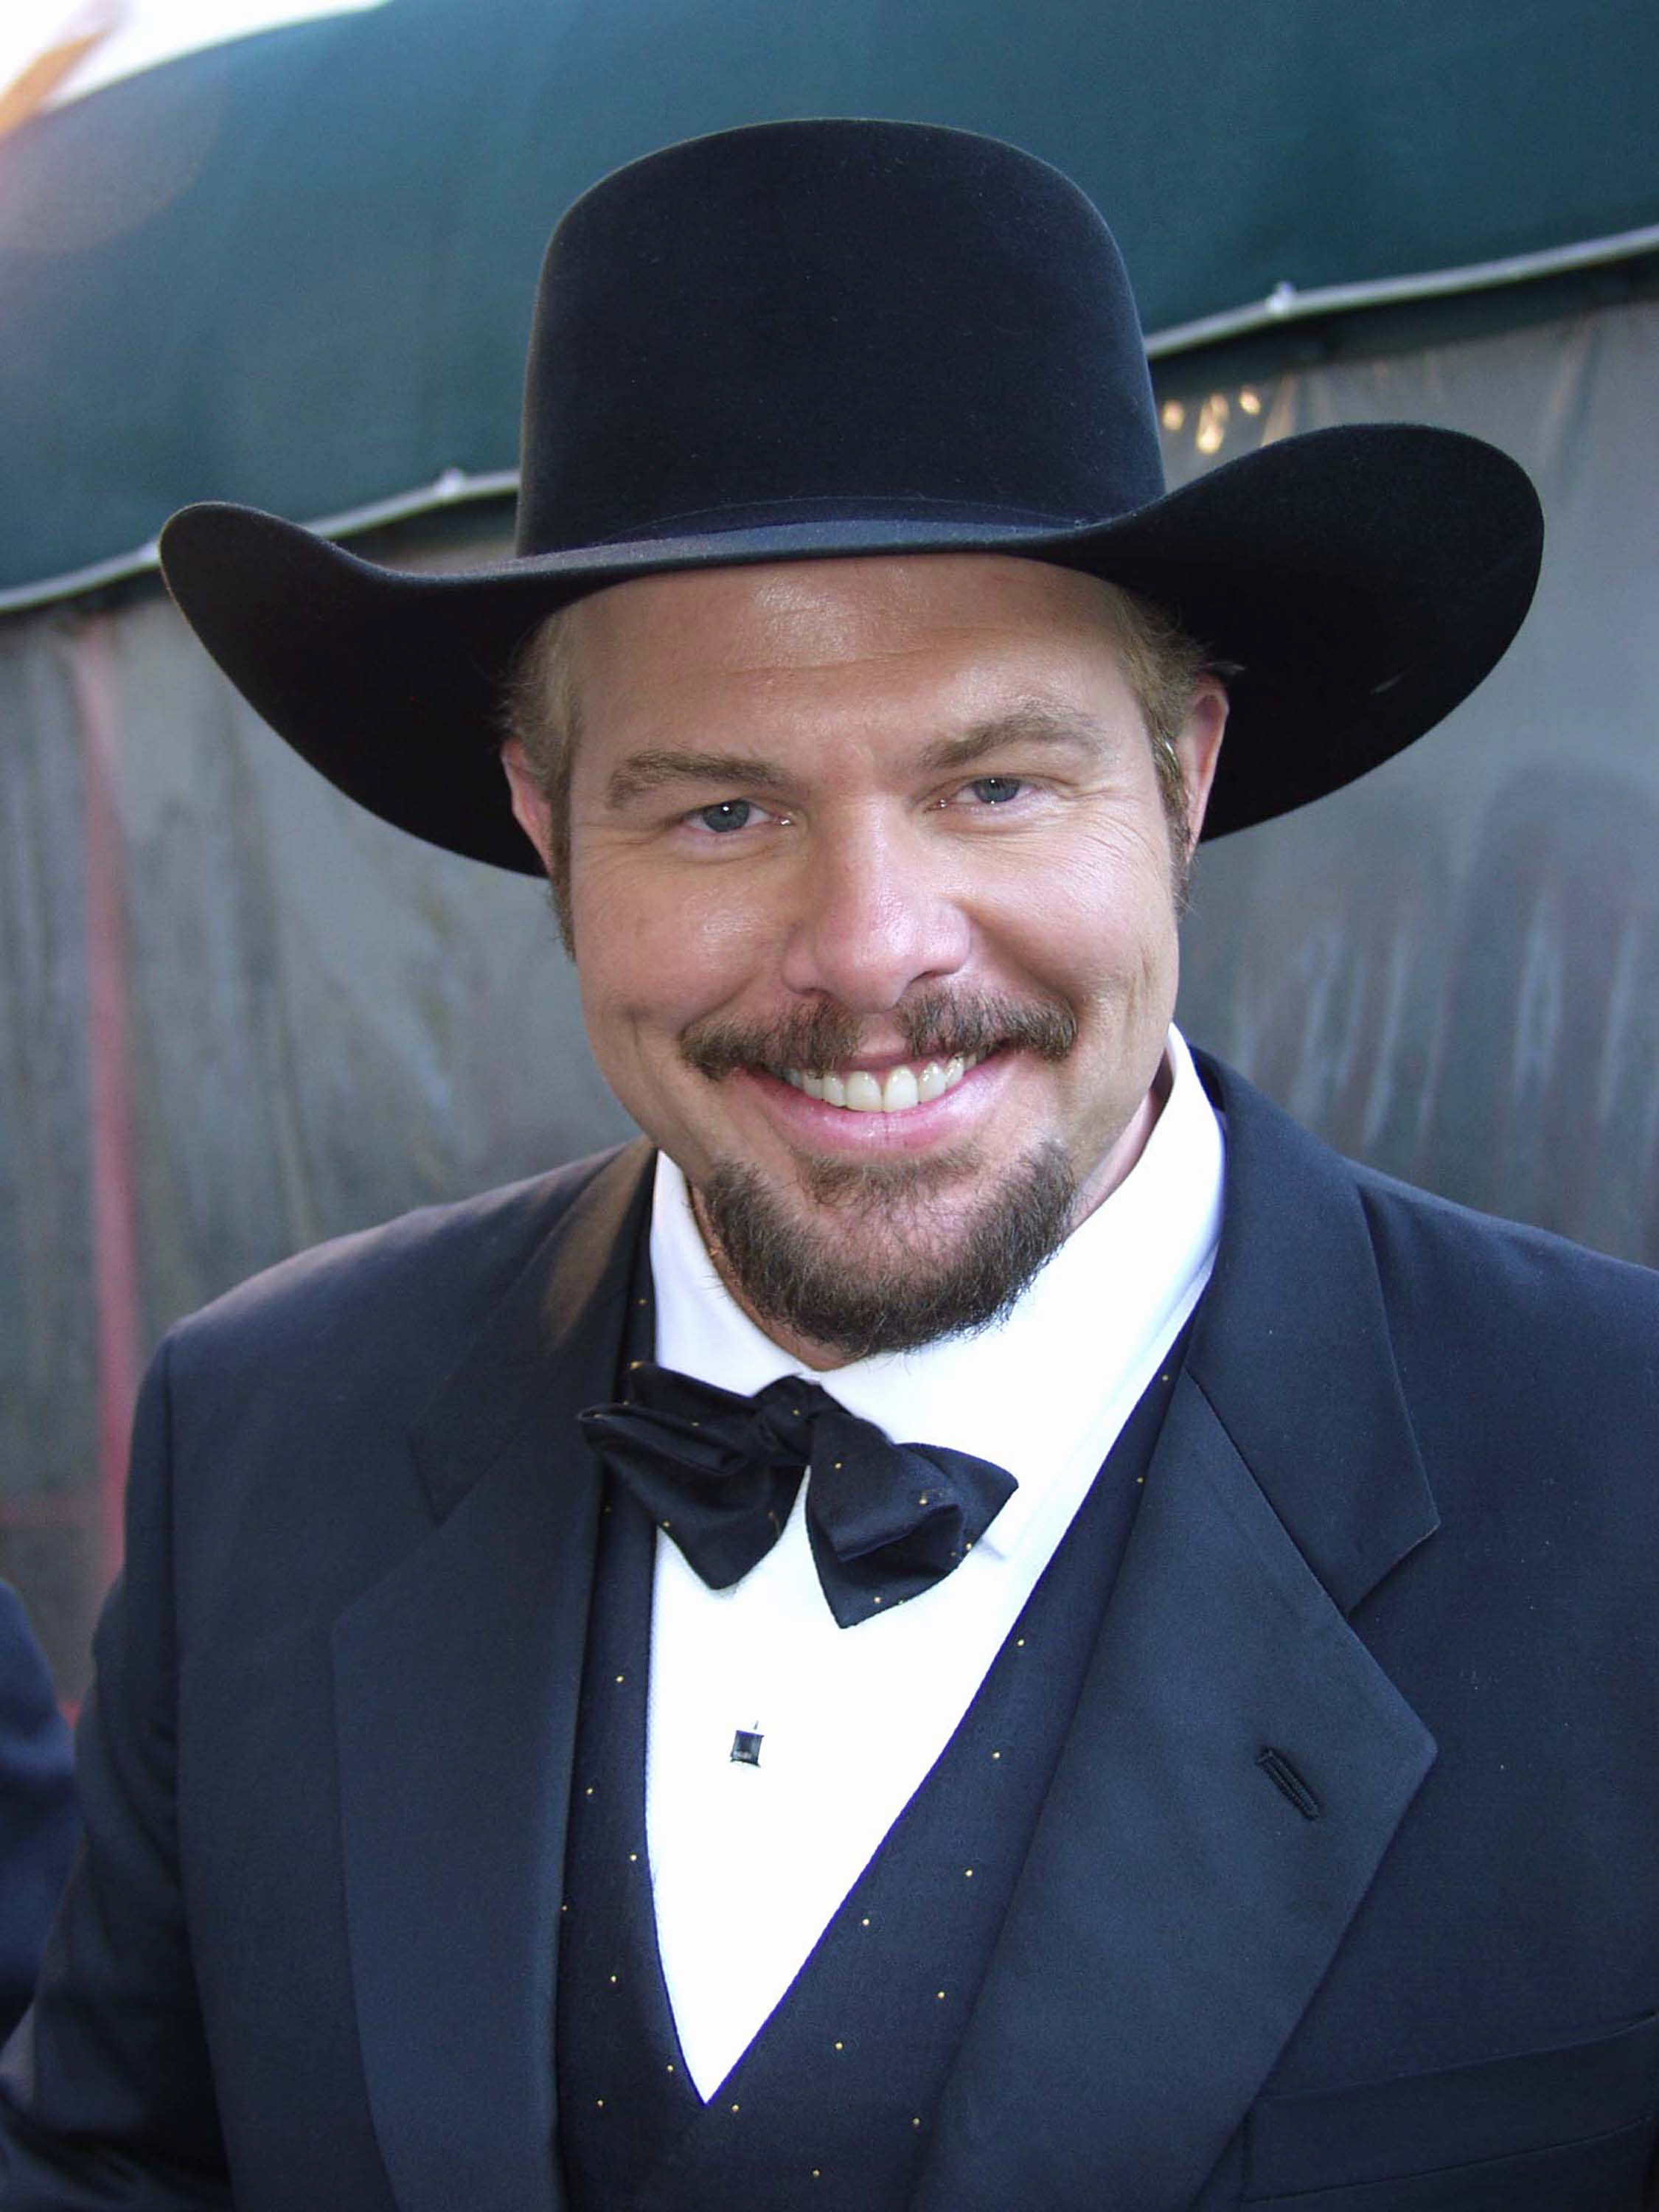 Toby Keith poses for a photo in 2005 | Source: Getty Images